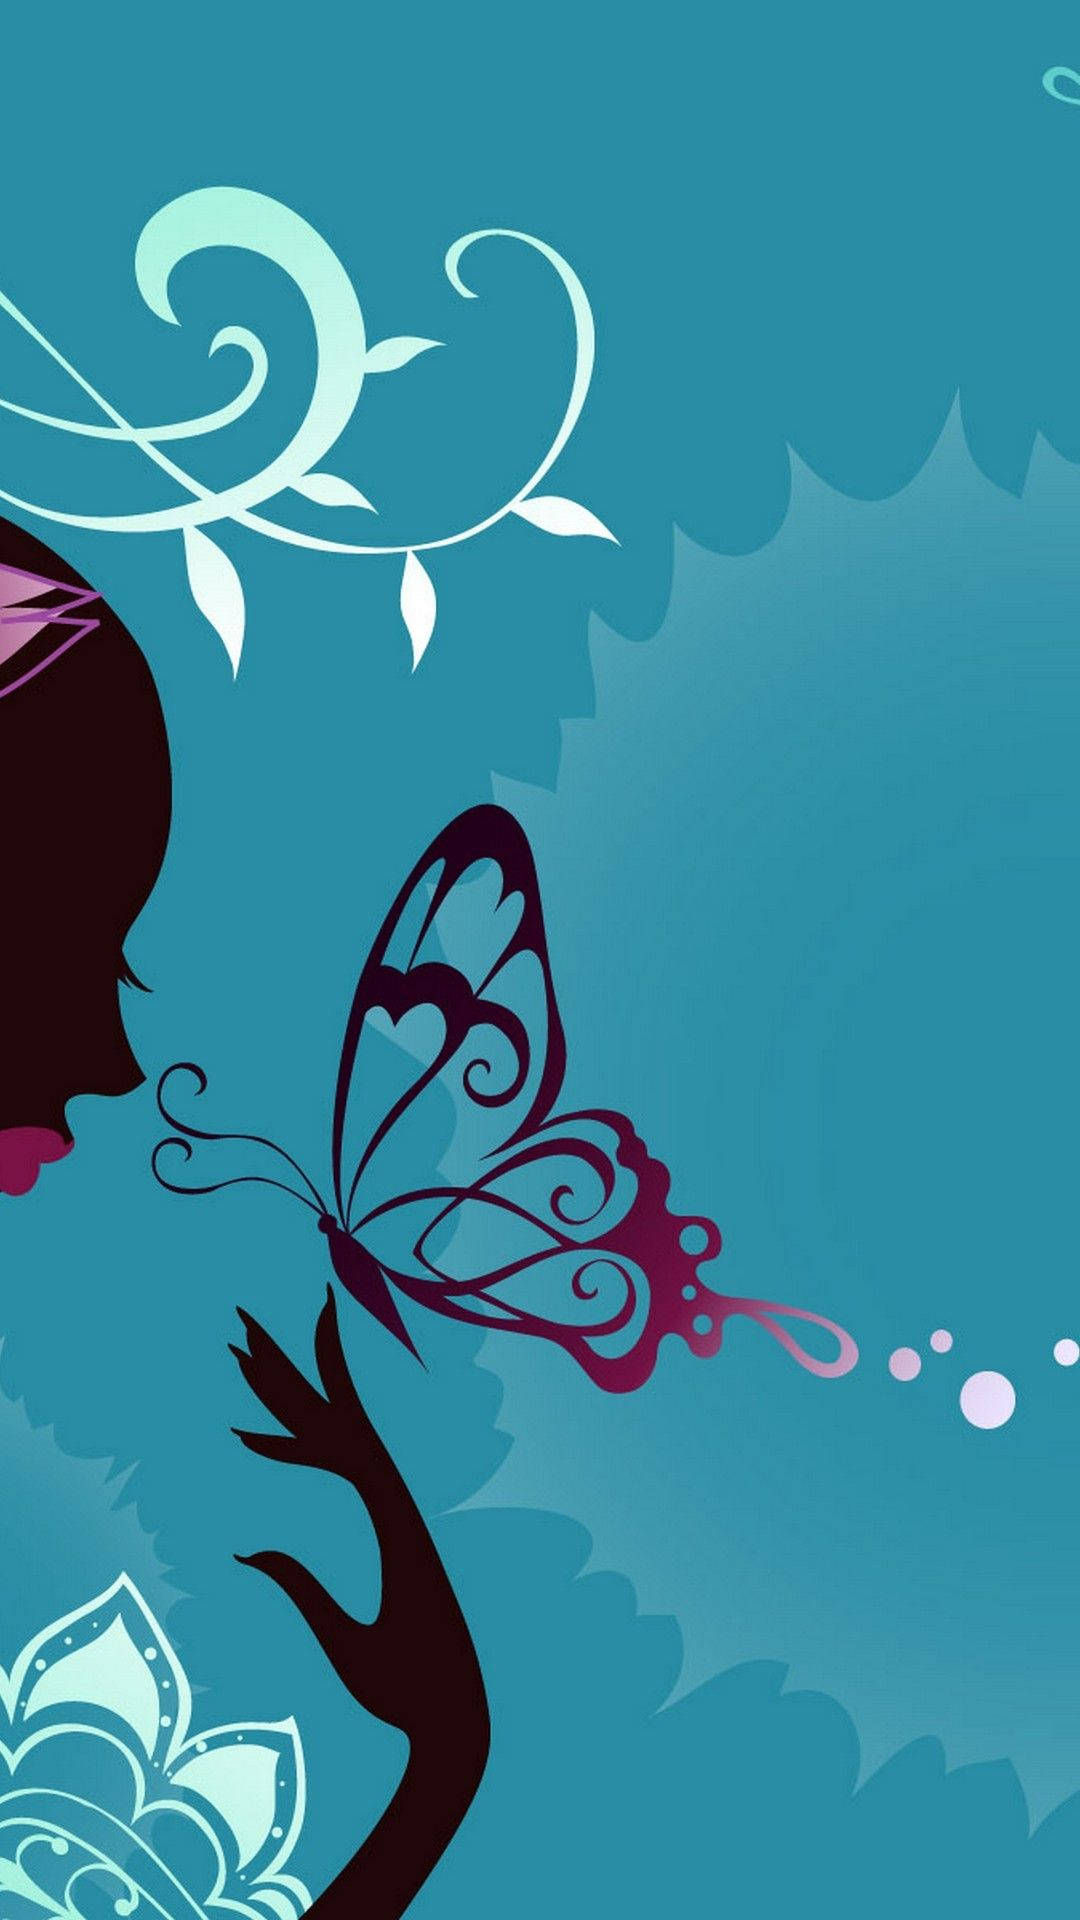 Marvelous Illustration Of Butterfly Iphone Theme Wallpaper